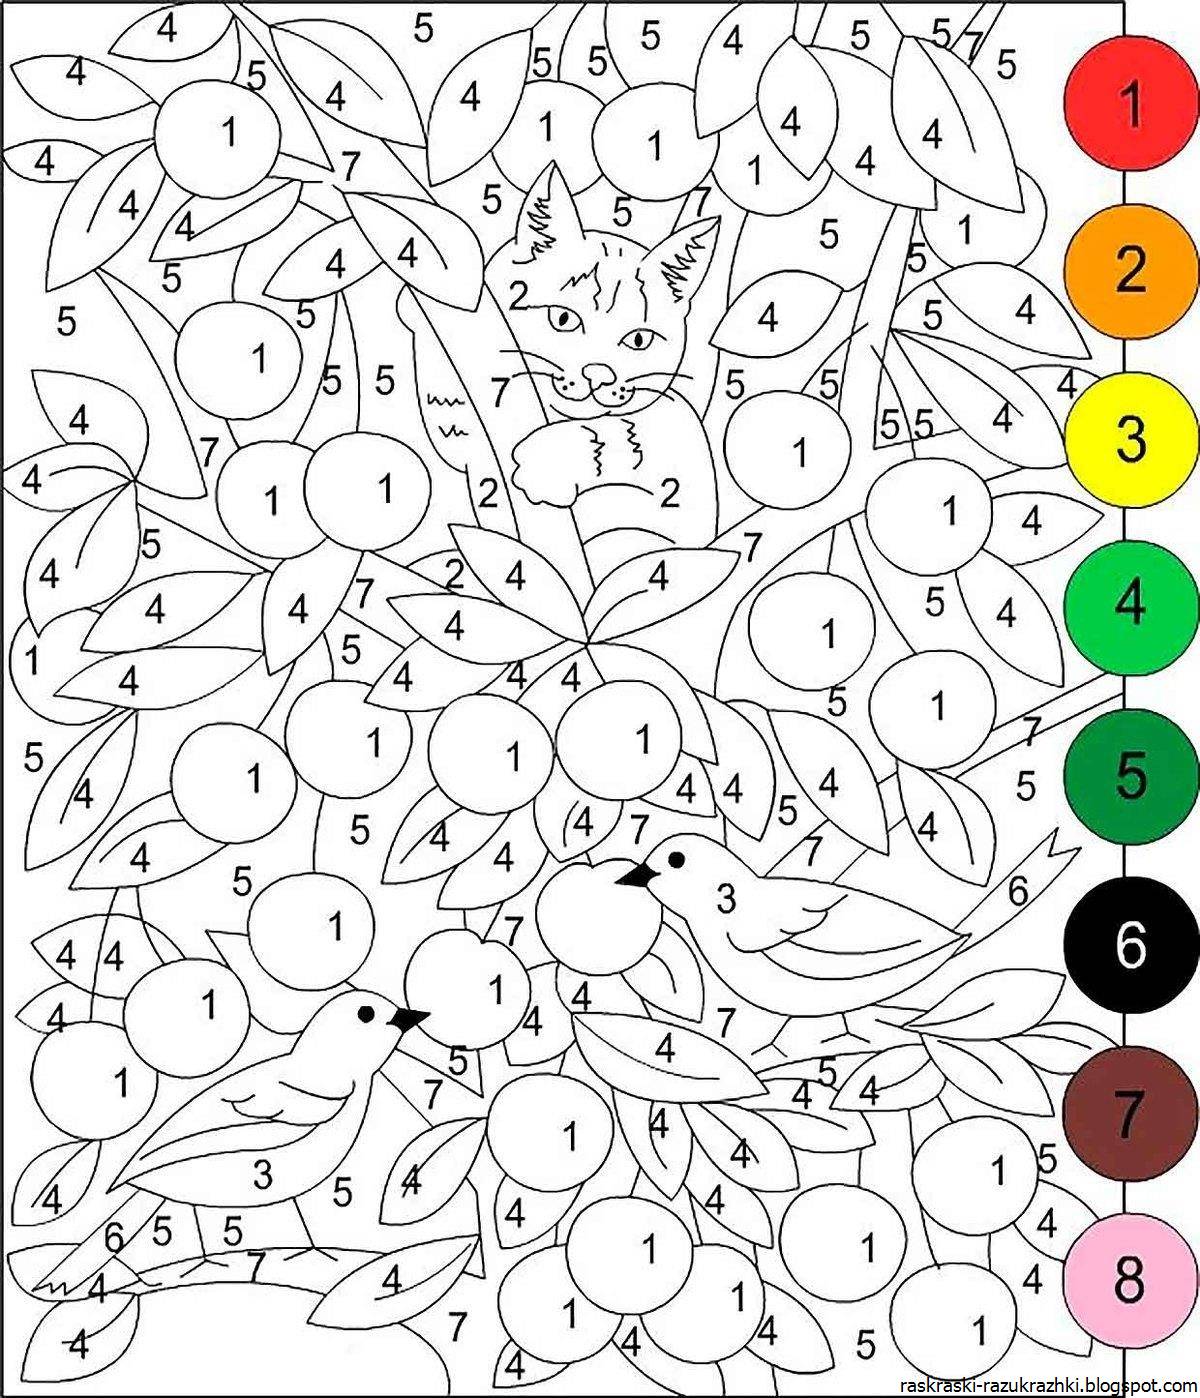 Bright coloring by numbers for children 7-8 years old